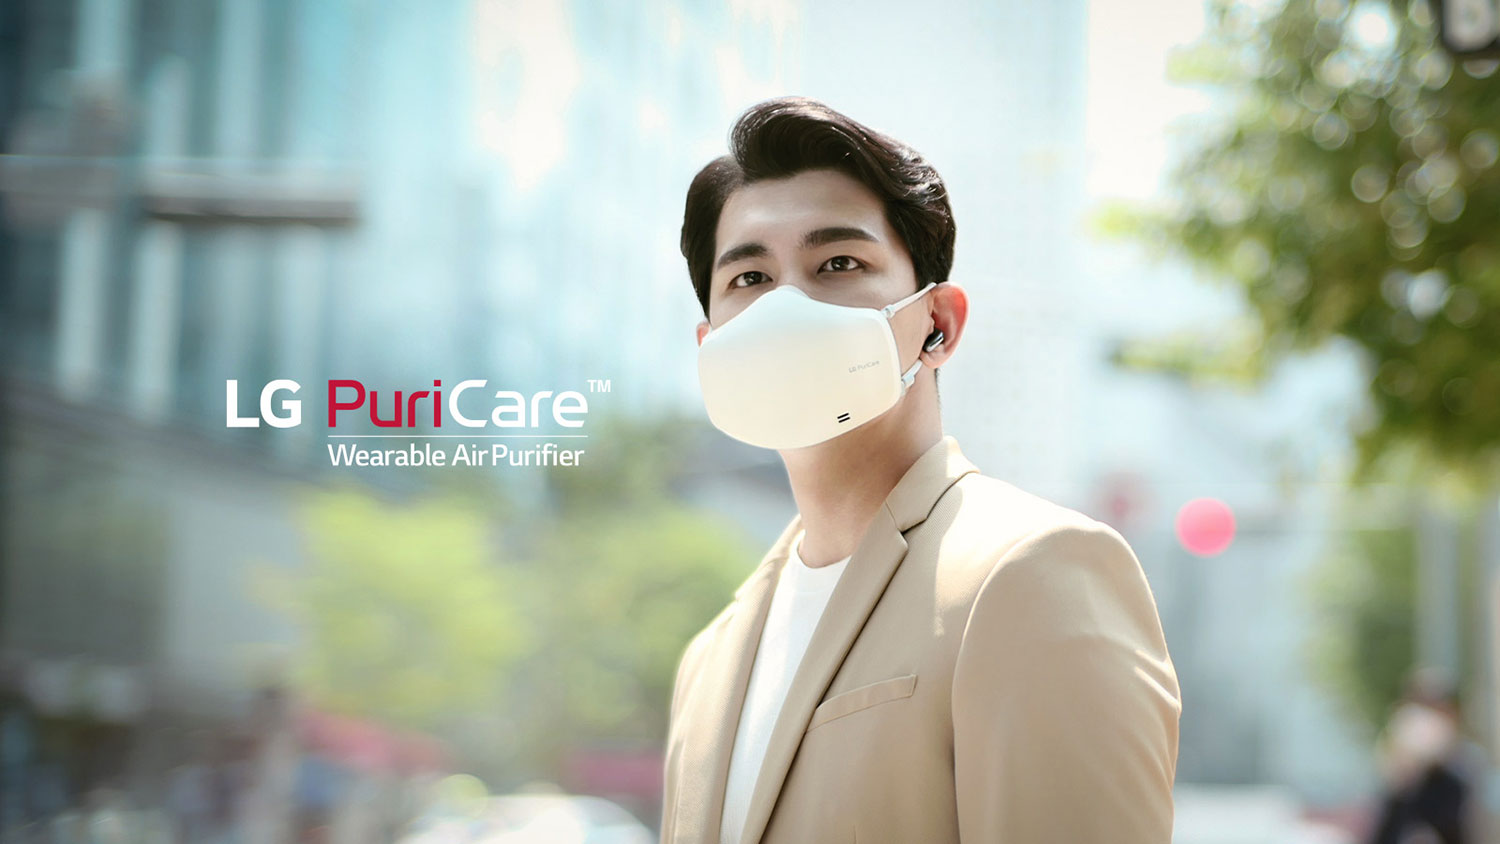 LG PuriCare Wearable Air Purifier Now Available For Pre-Order